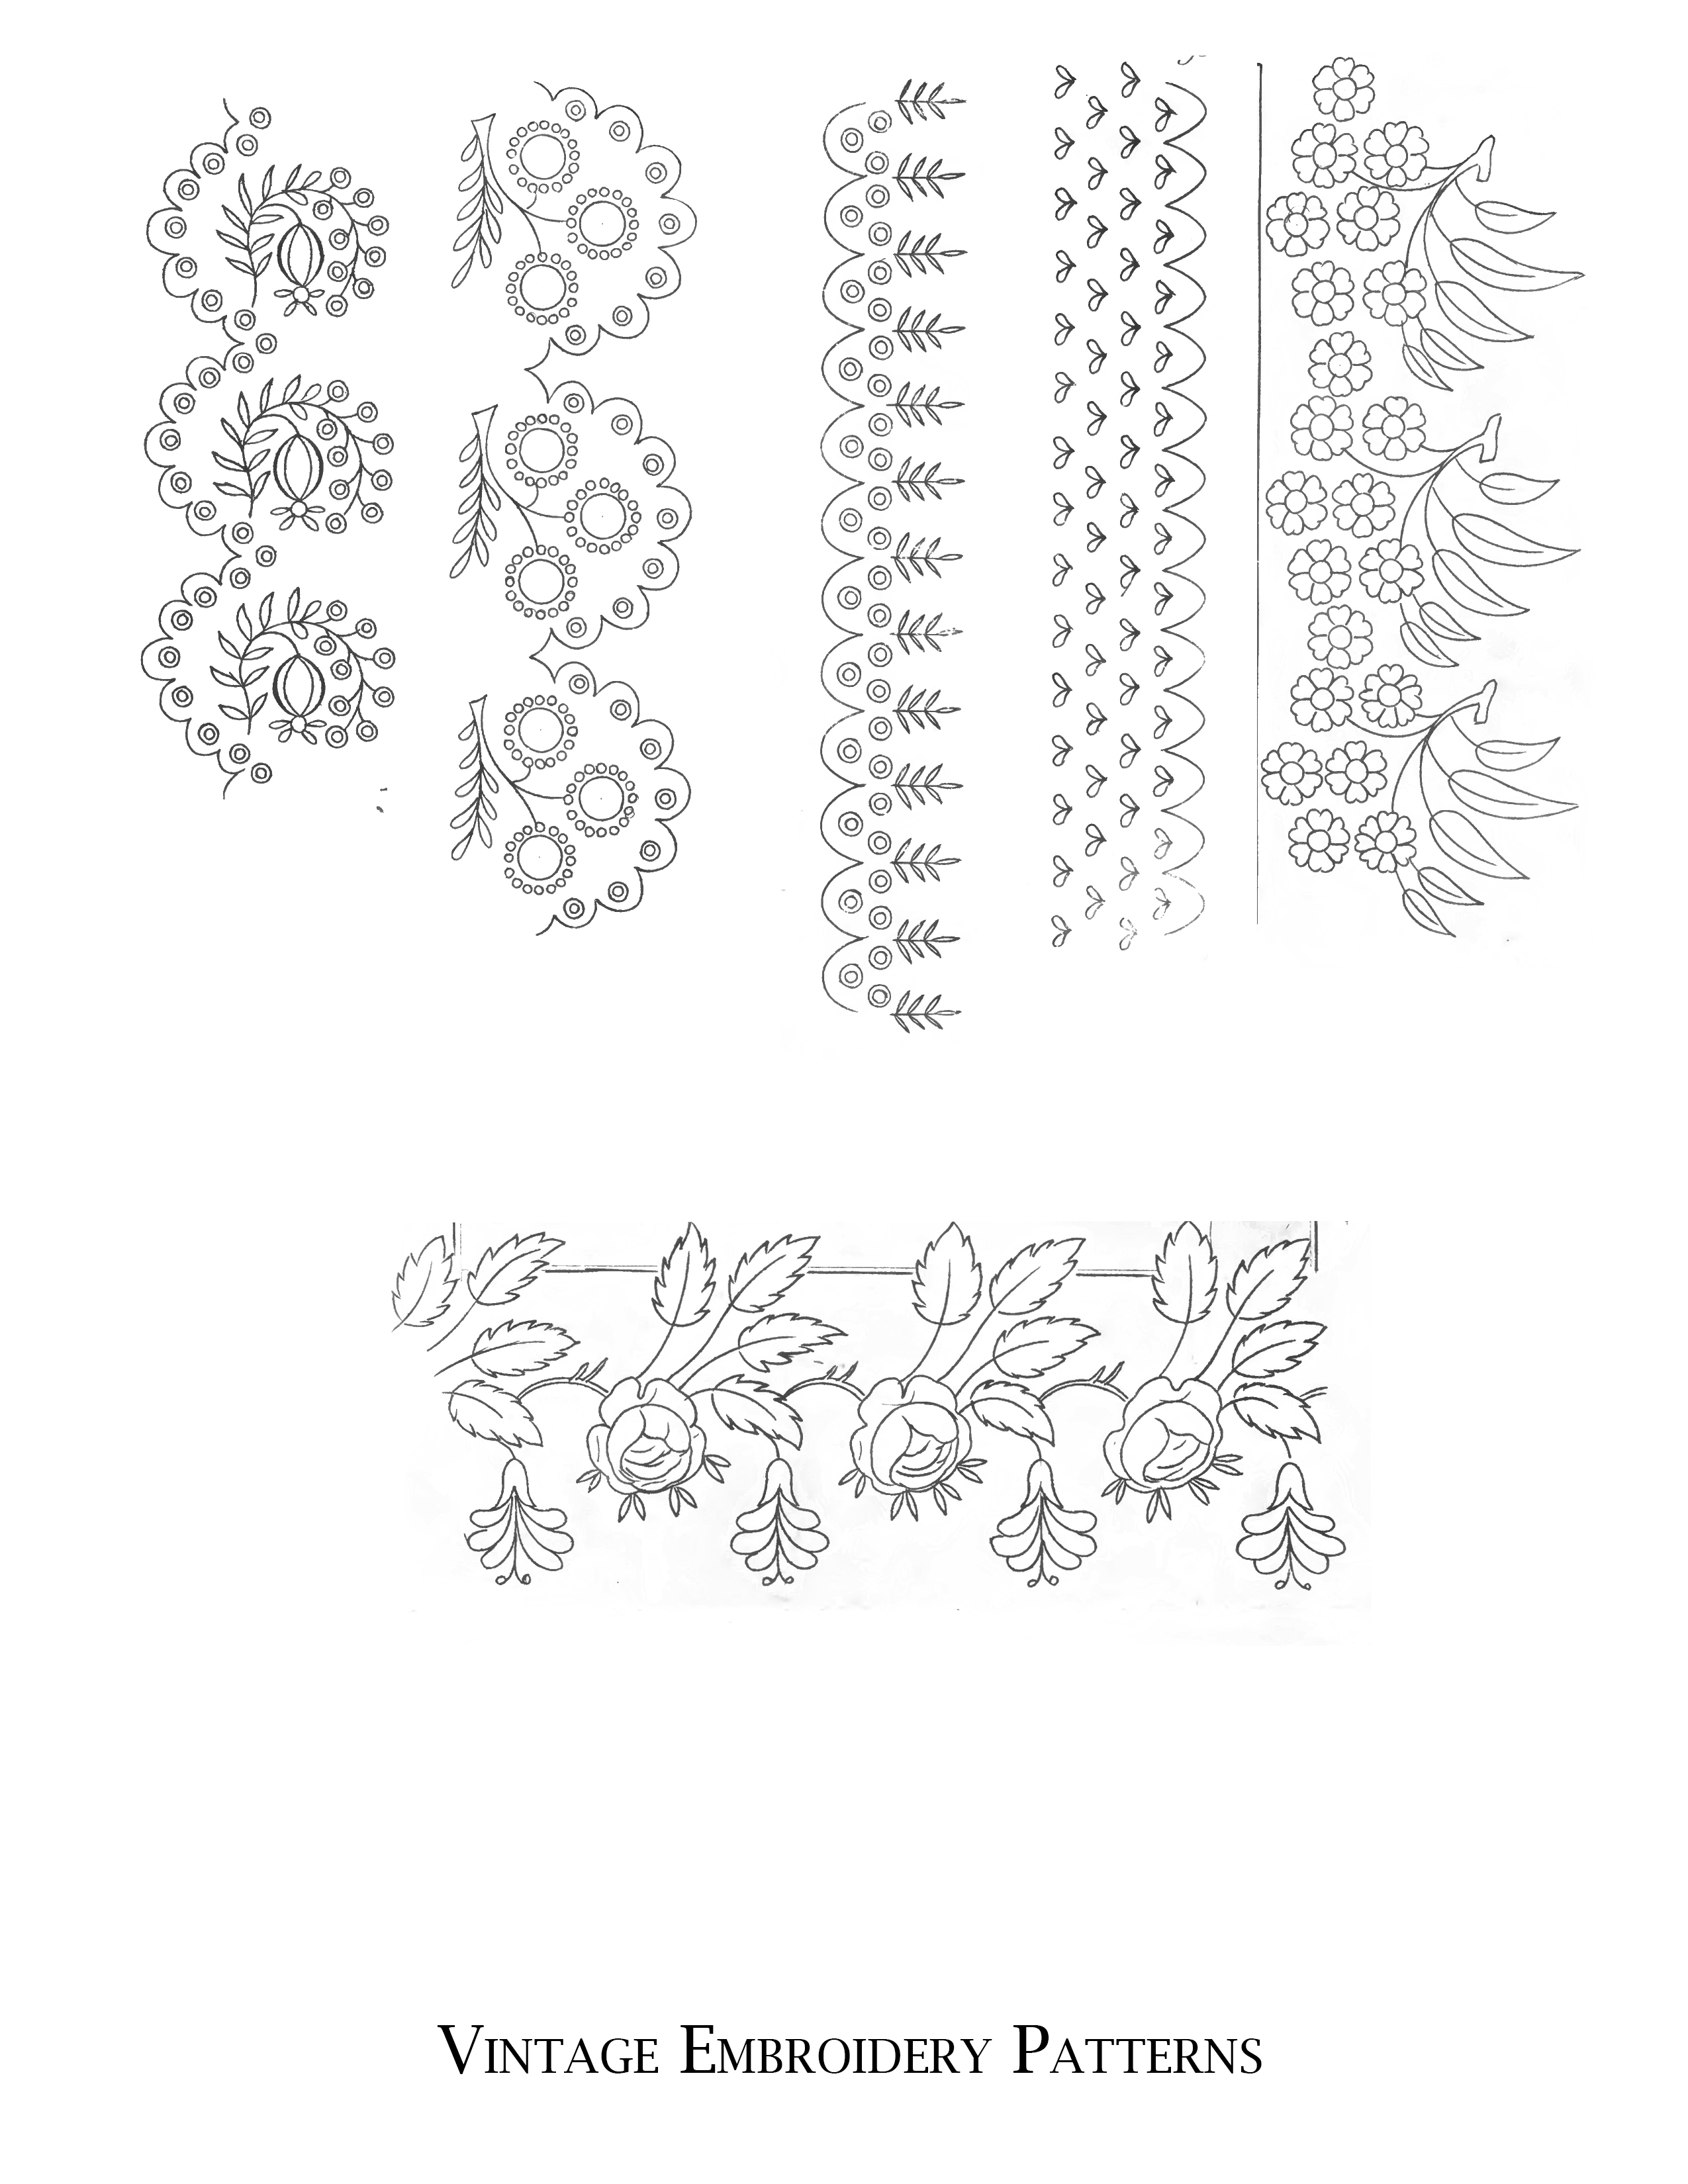 Retro Embroidery Patterns Embroidery Patterns Archives Page 2 Of 2 The Graffical Muse